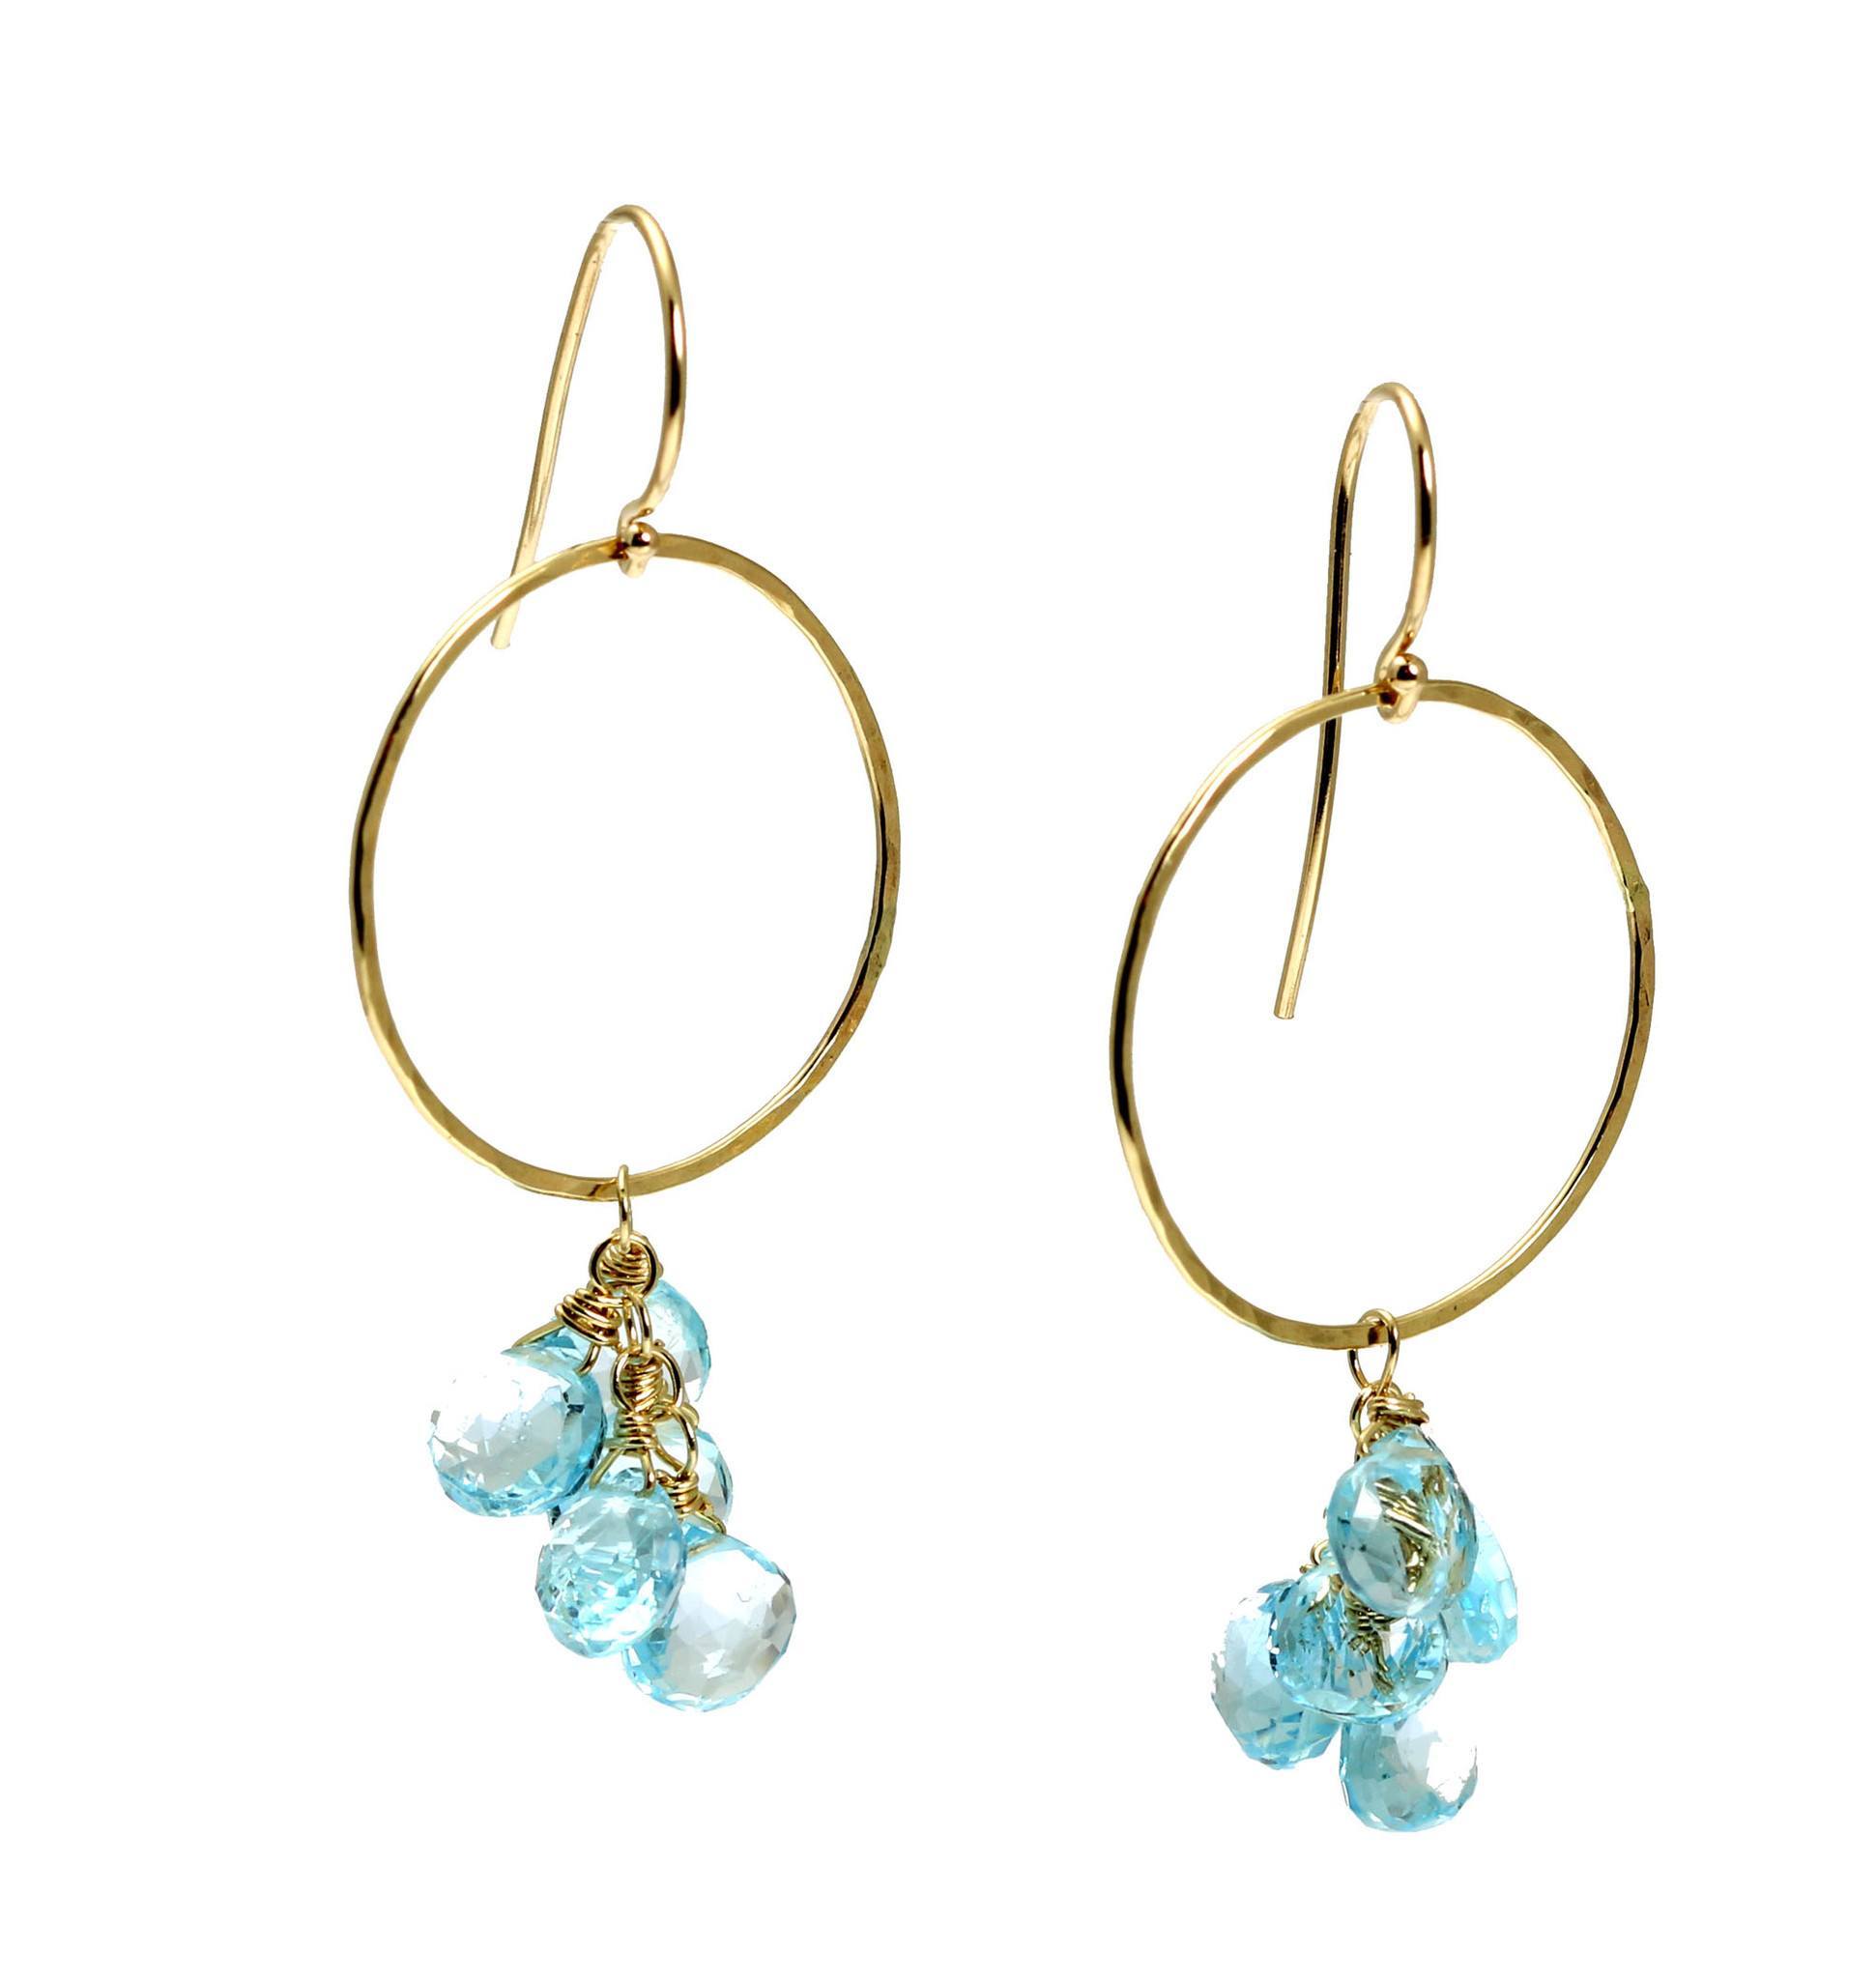 Shape of 14K Hammered Gold Earrings With Blue Topaz